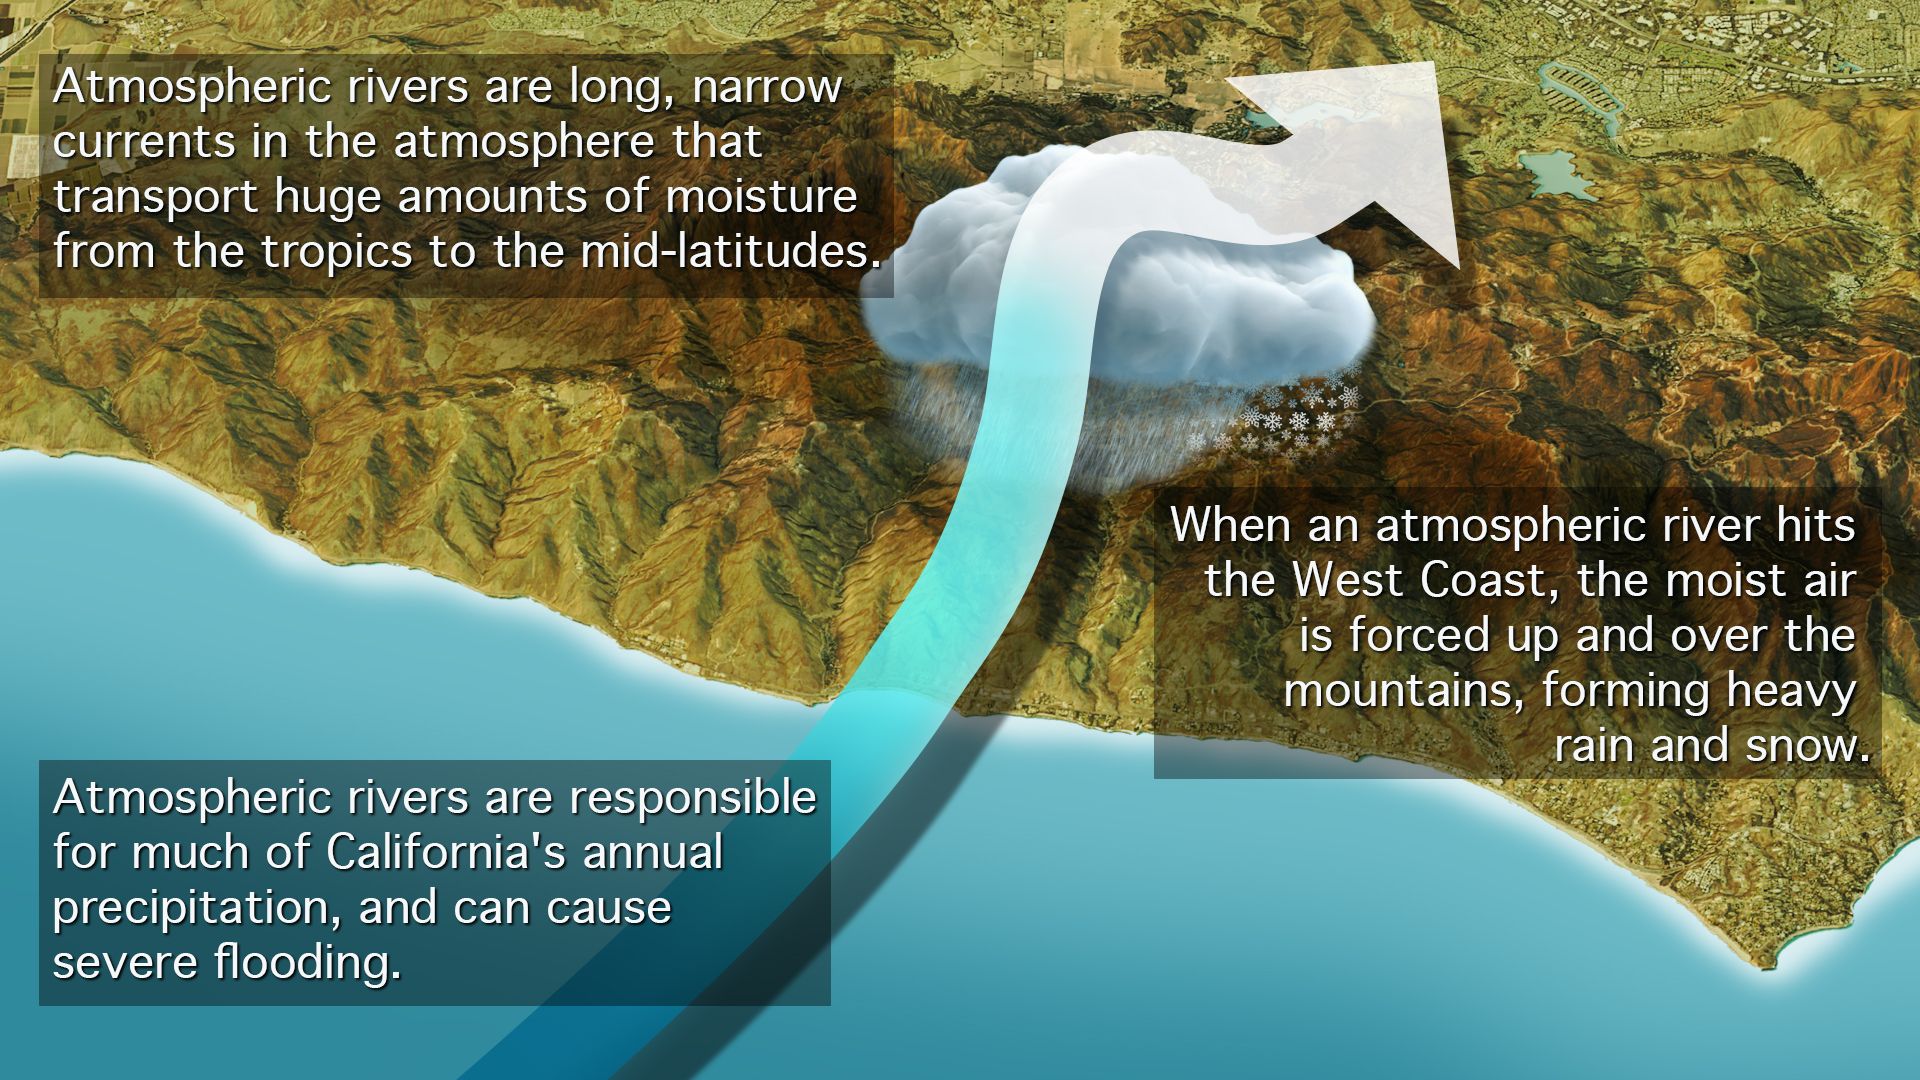 Diagram showing an atmospheric river along the West Coast.